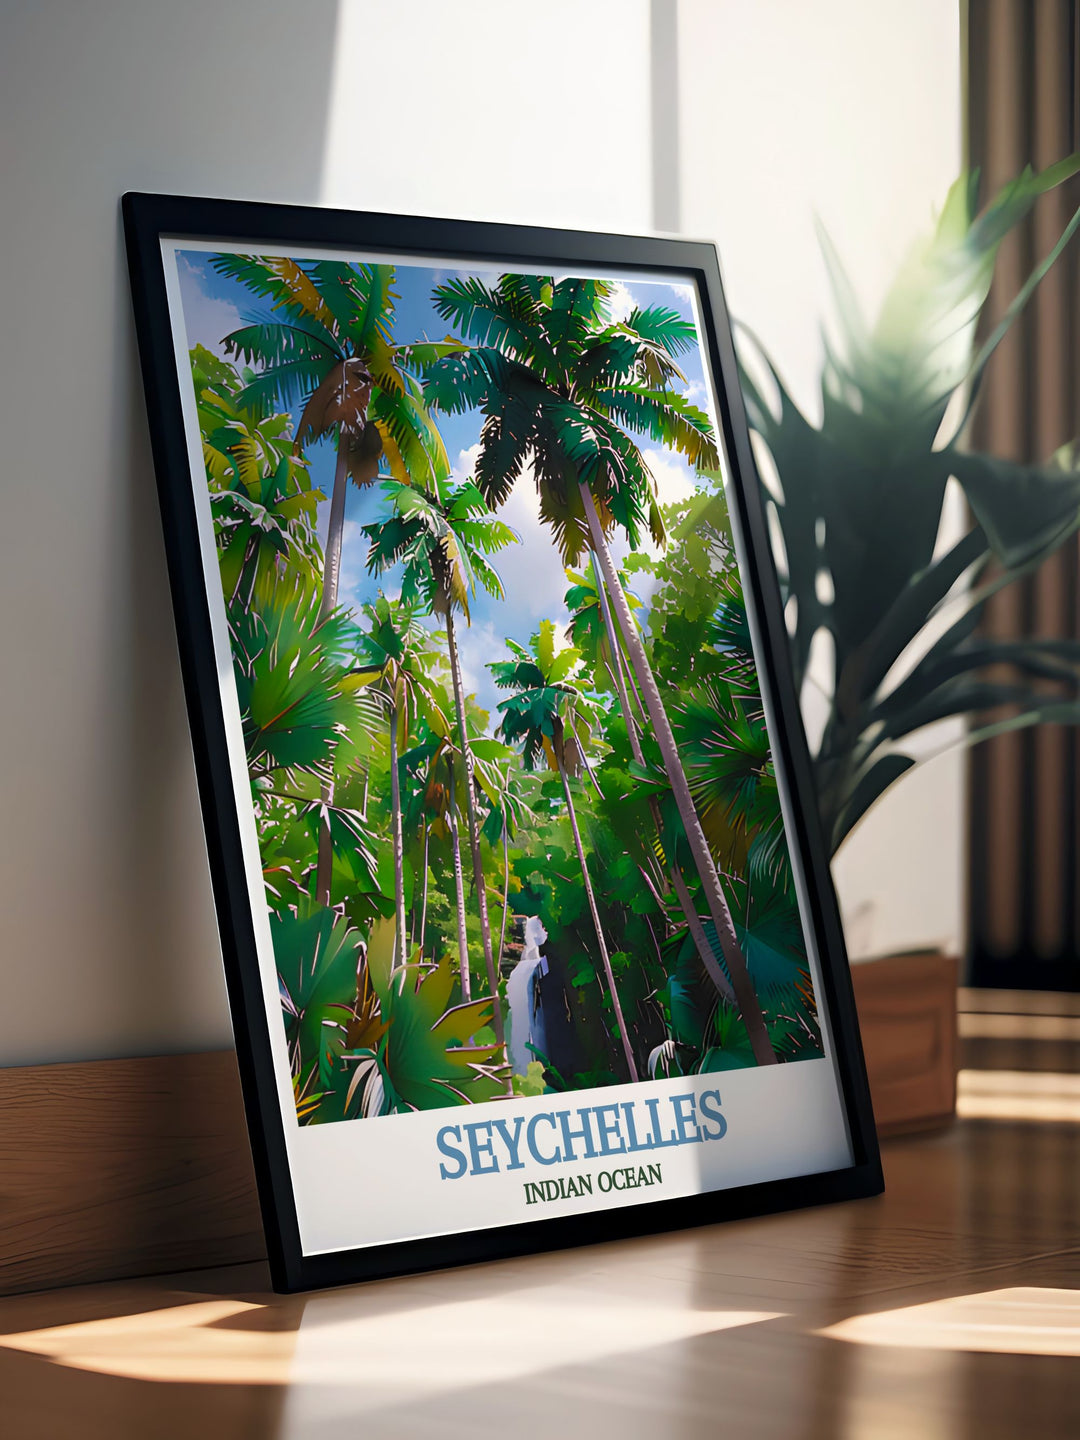 Featuring the vibrant scenery of Vallée de Mai in Seychelles, this travel poster is perfect for those who love exploring tropical destinations and appreciating the beauty of nature.